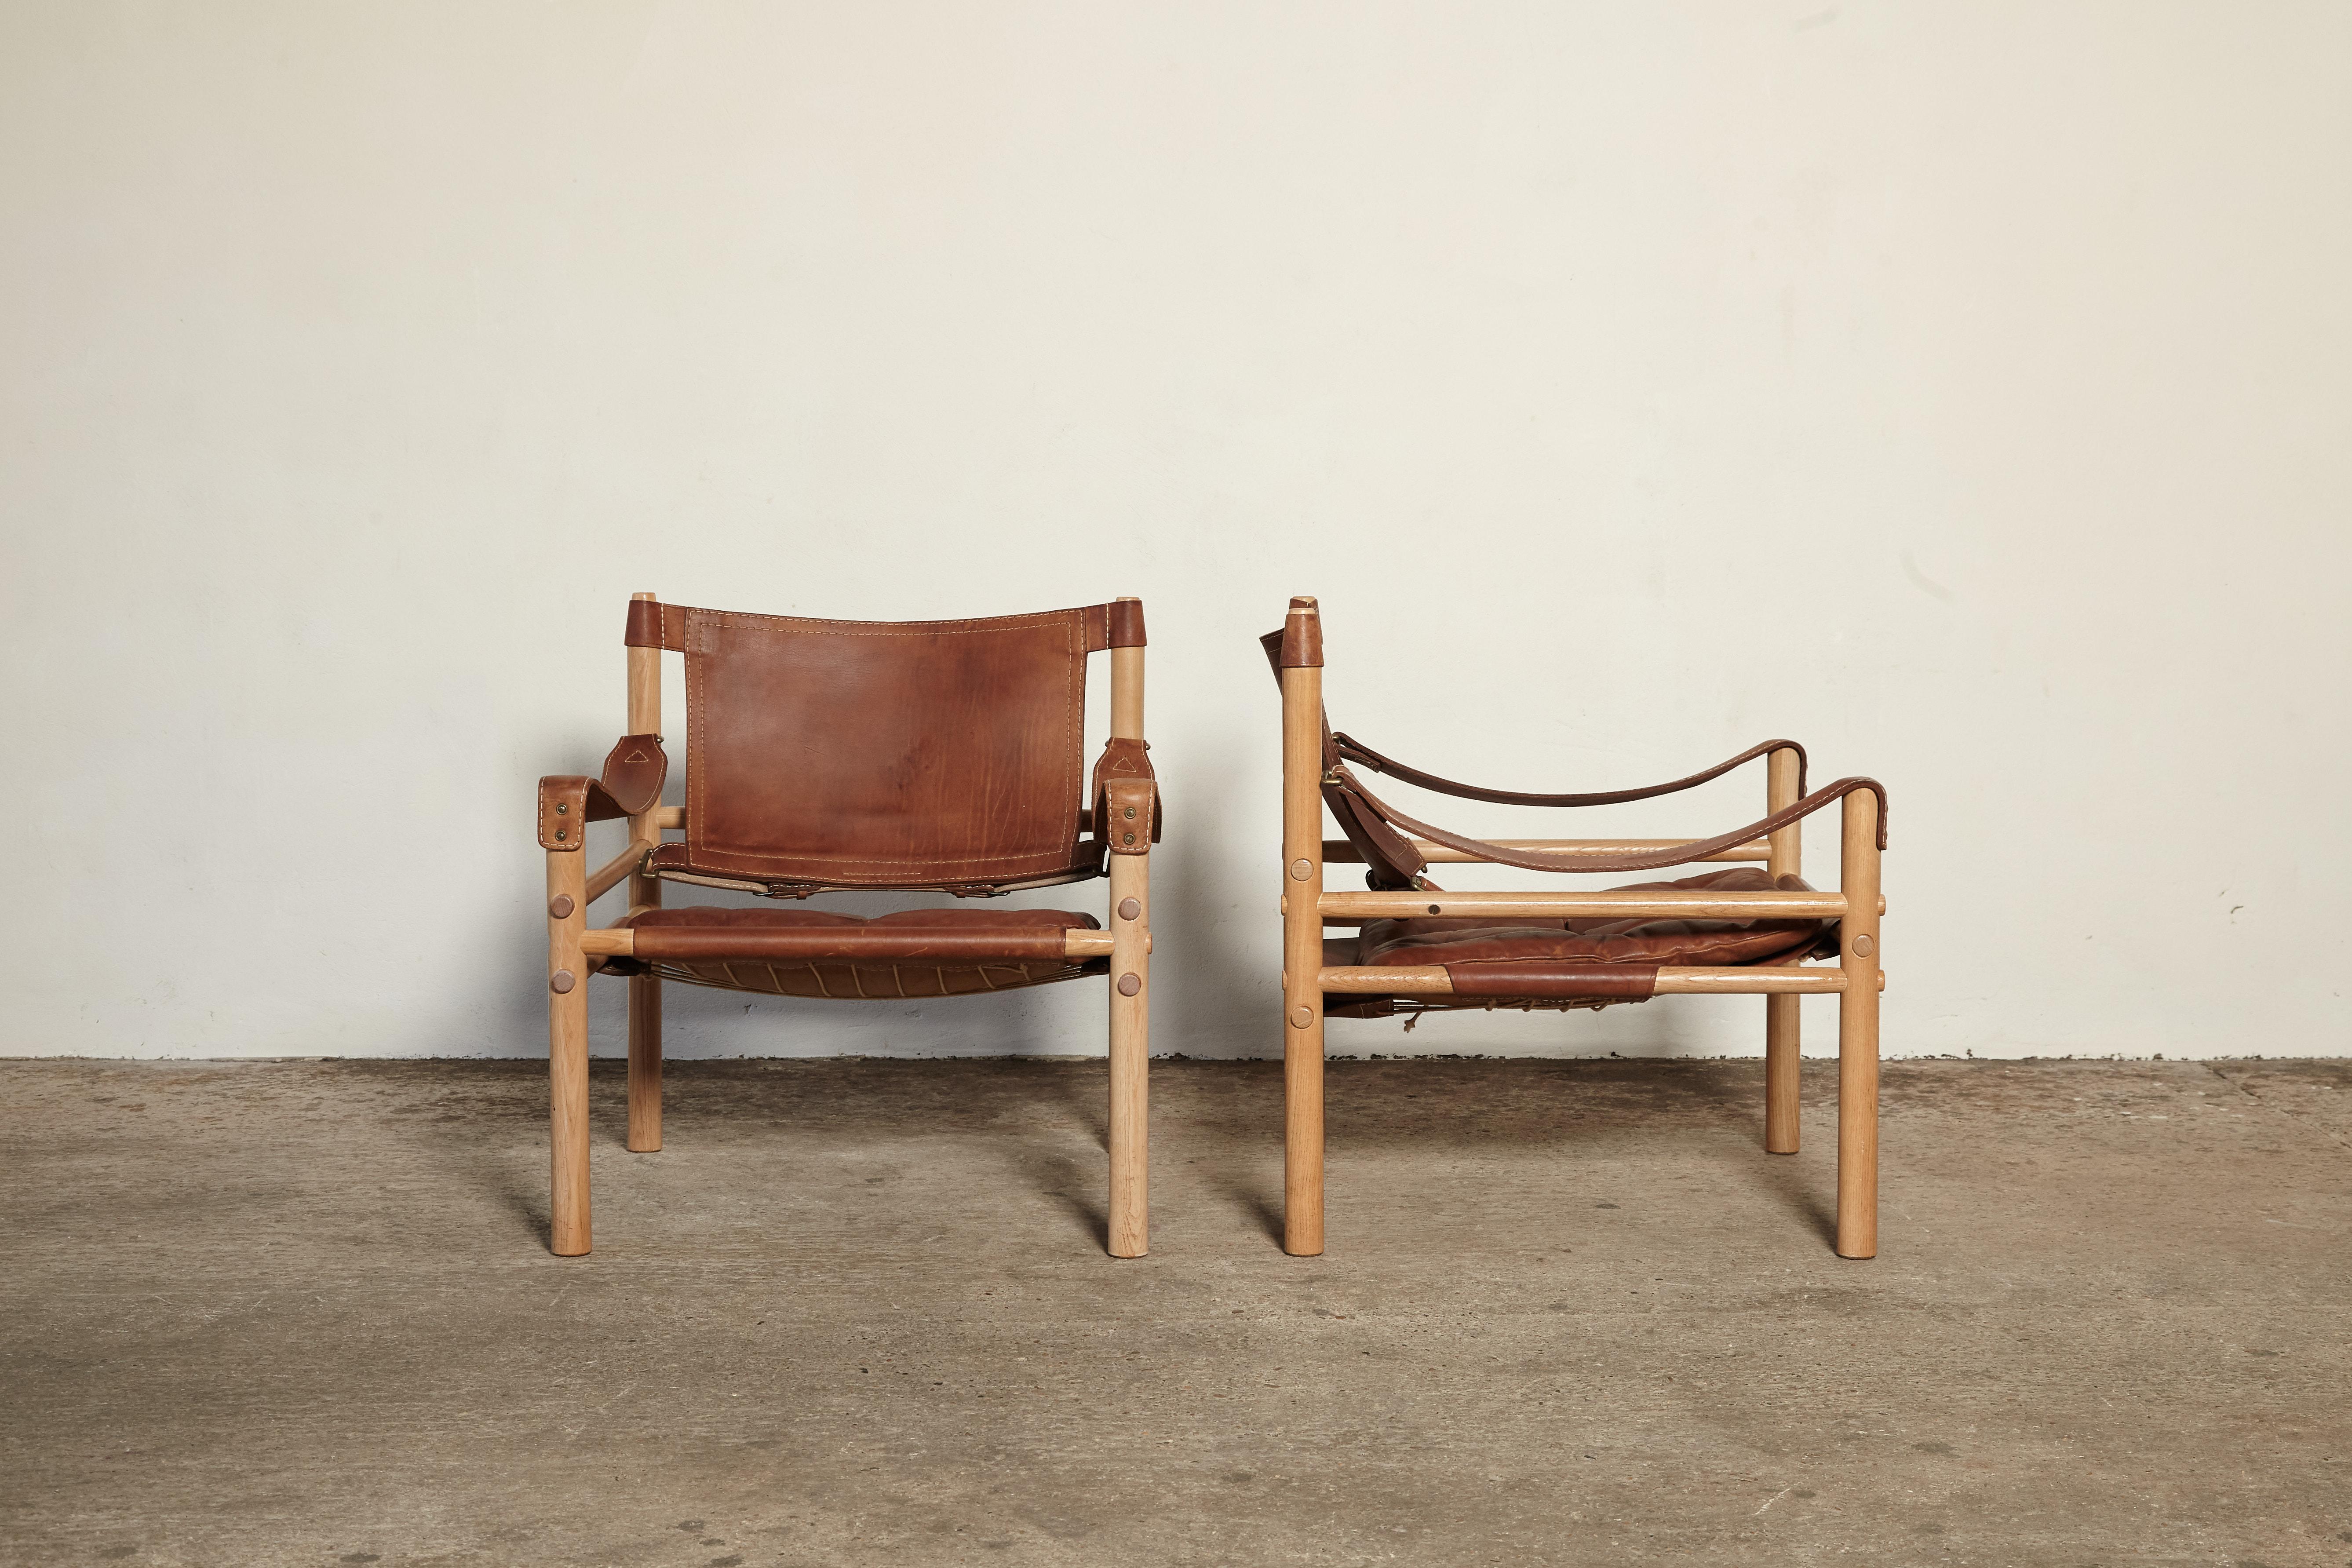 A lovely original pair of Arne Norell safari sirocco chair wtih wood frames and patinated brown leather seats. In lovely vintage condition. Made by Norell Mobel in Sweden with makers label intact. Fast and inexpensive shipping worldwide. The chairs